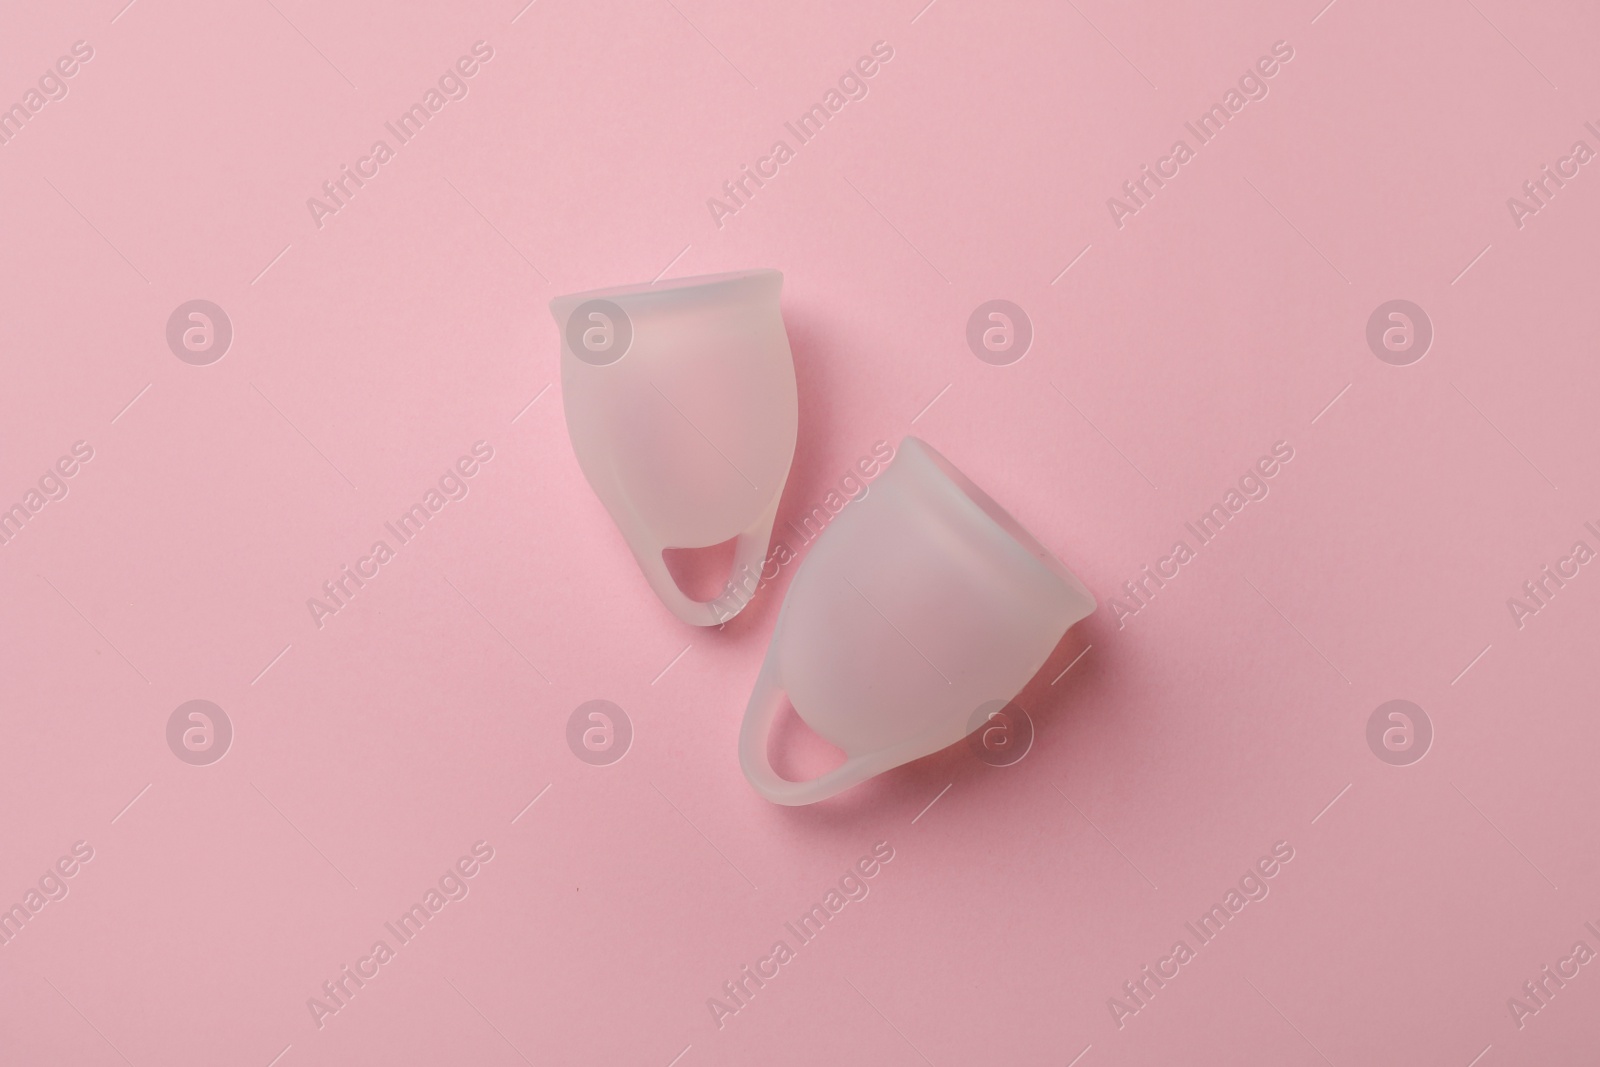 Photo of White menstrual cups on pink background, flat lay